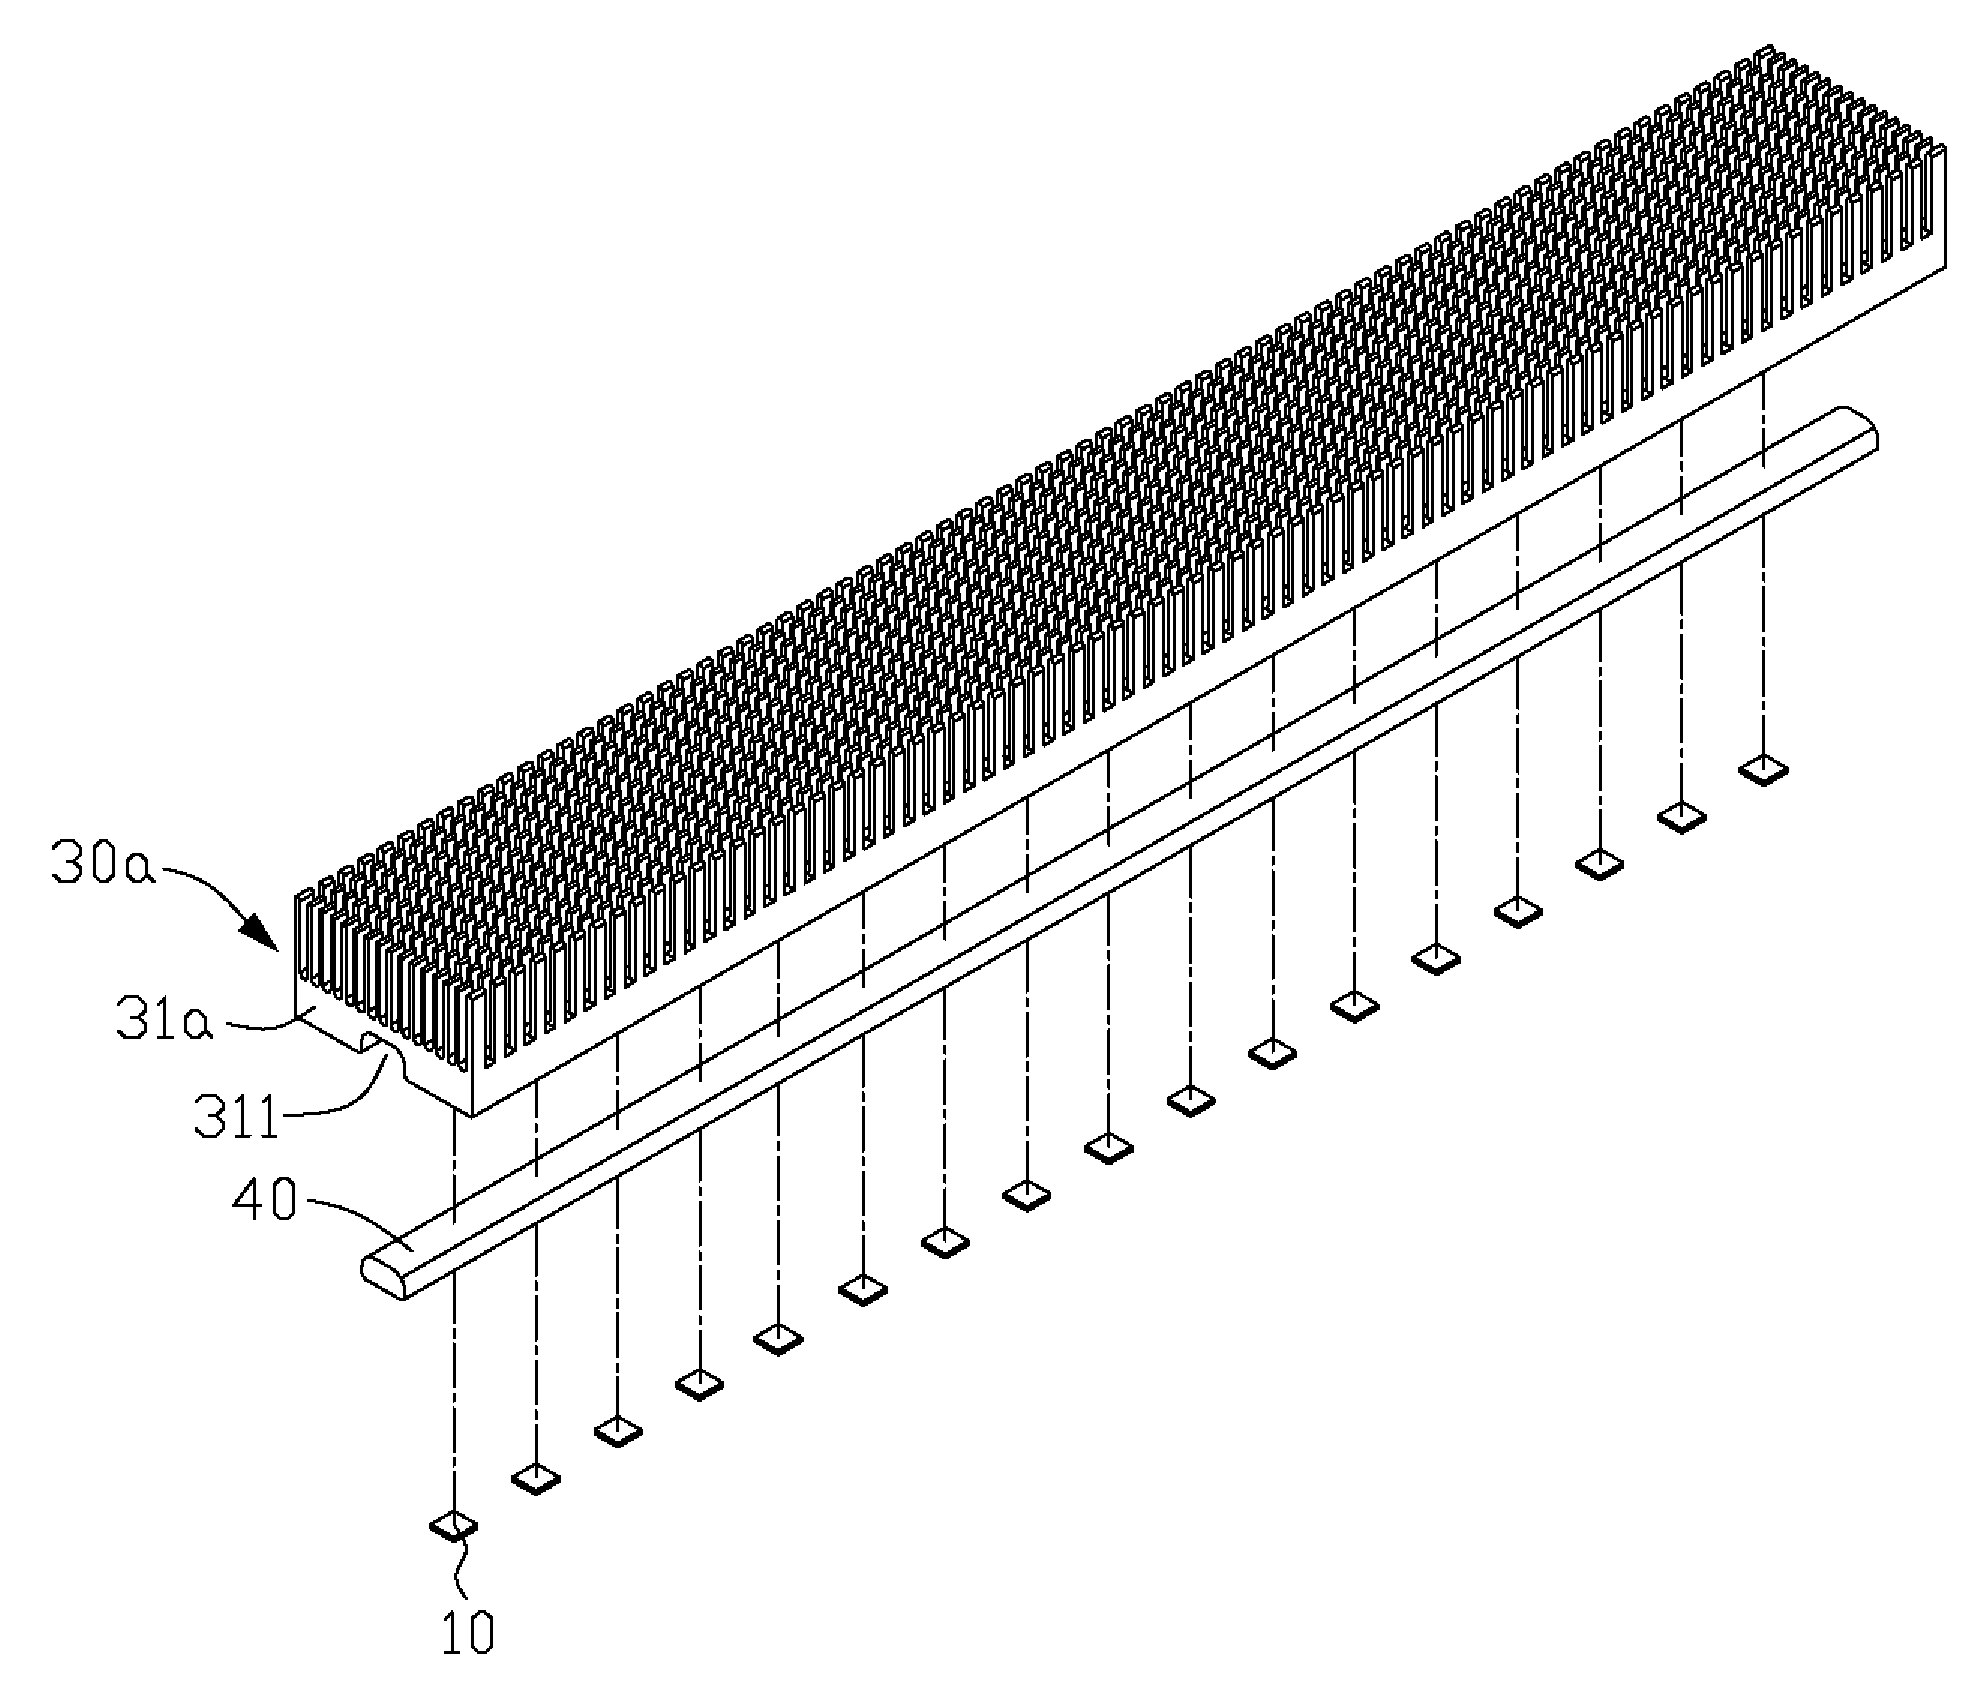 Light-emitting diode assembly and method of fabrication